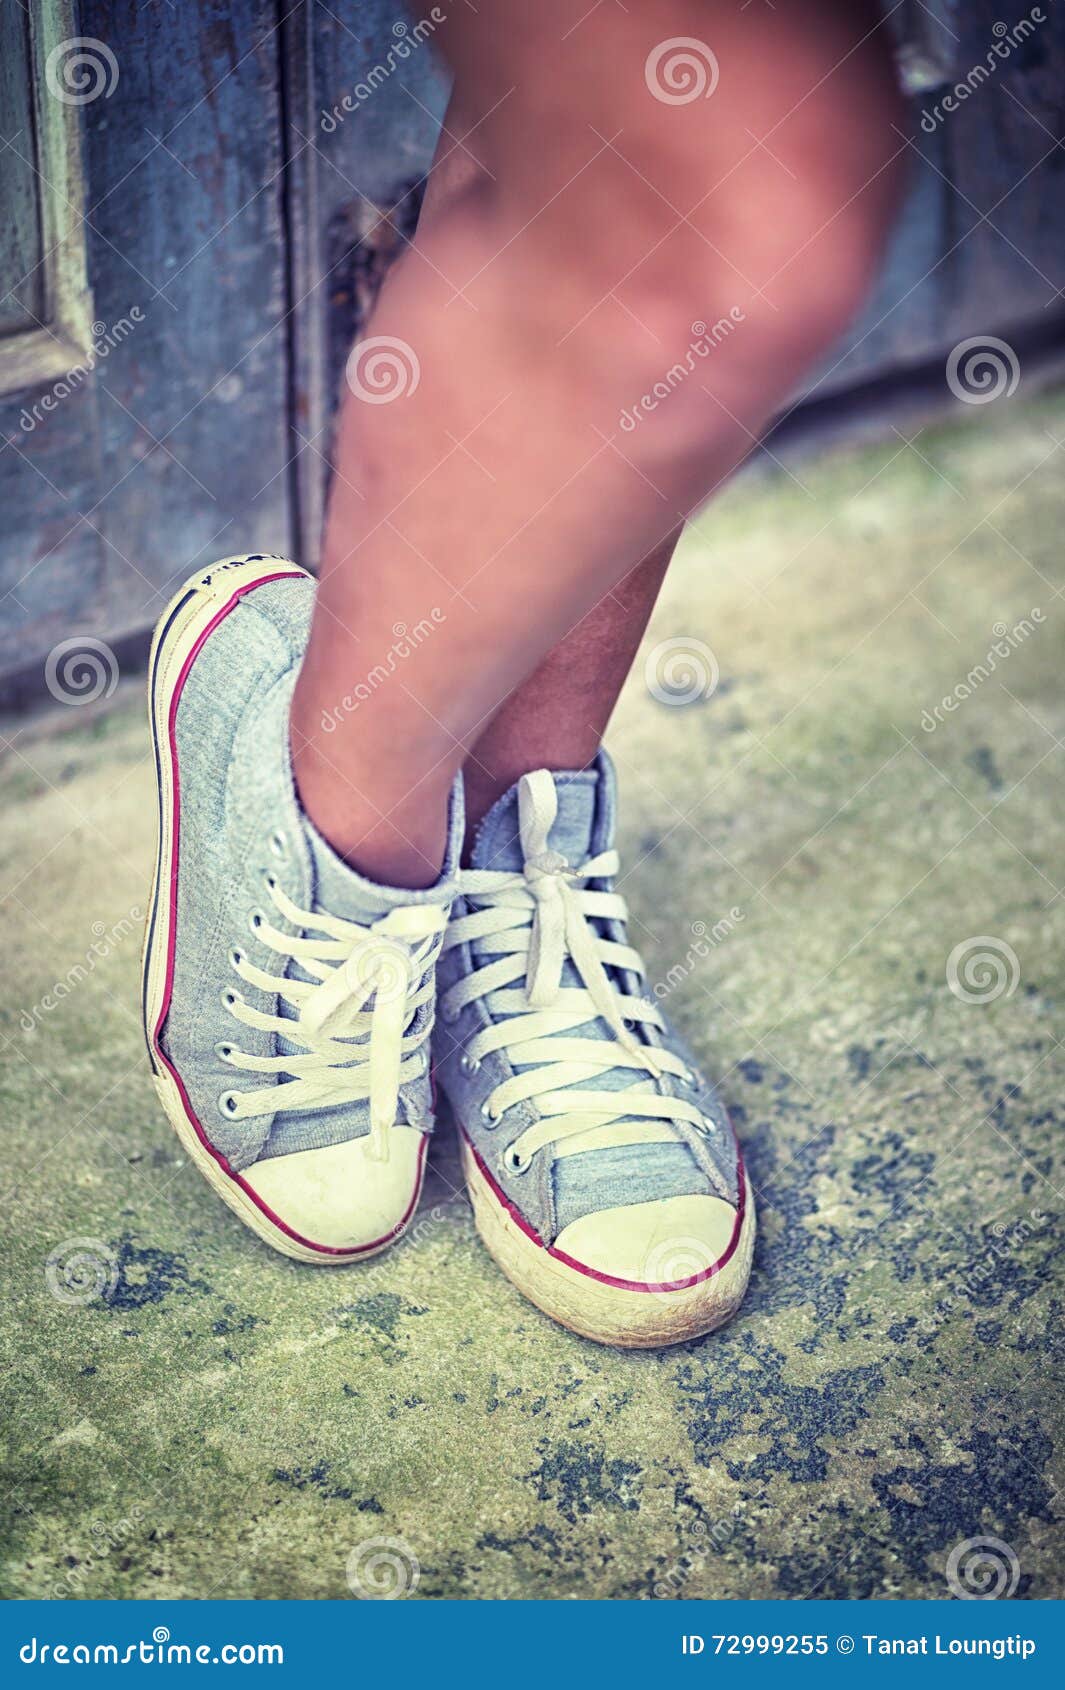 Asia Women in Shoe Standing Against Wood Wall Stock Image - Image of ...